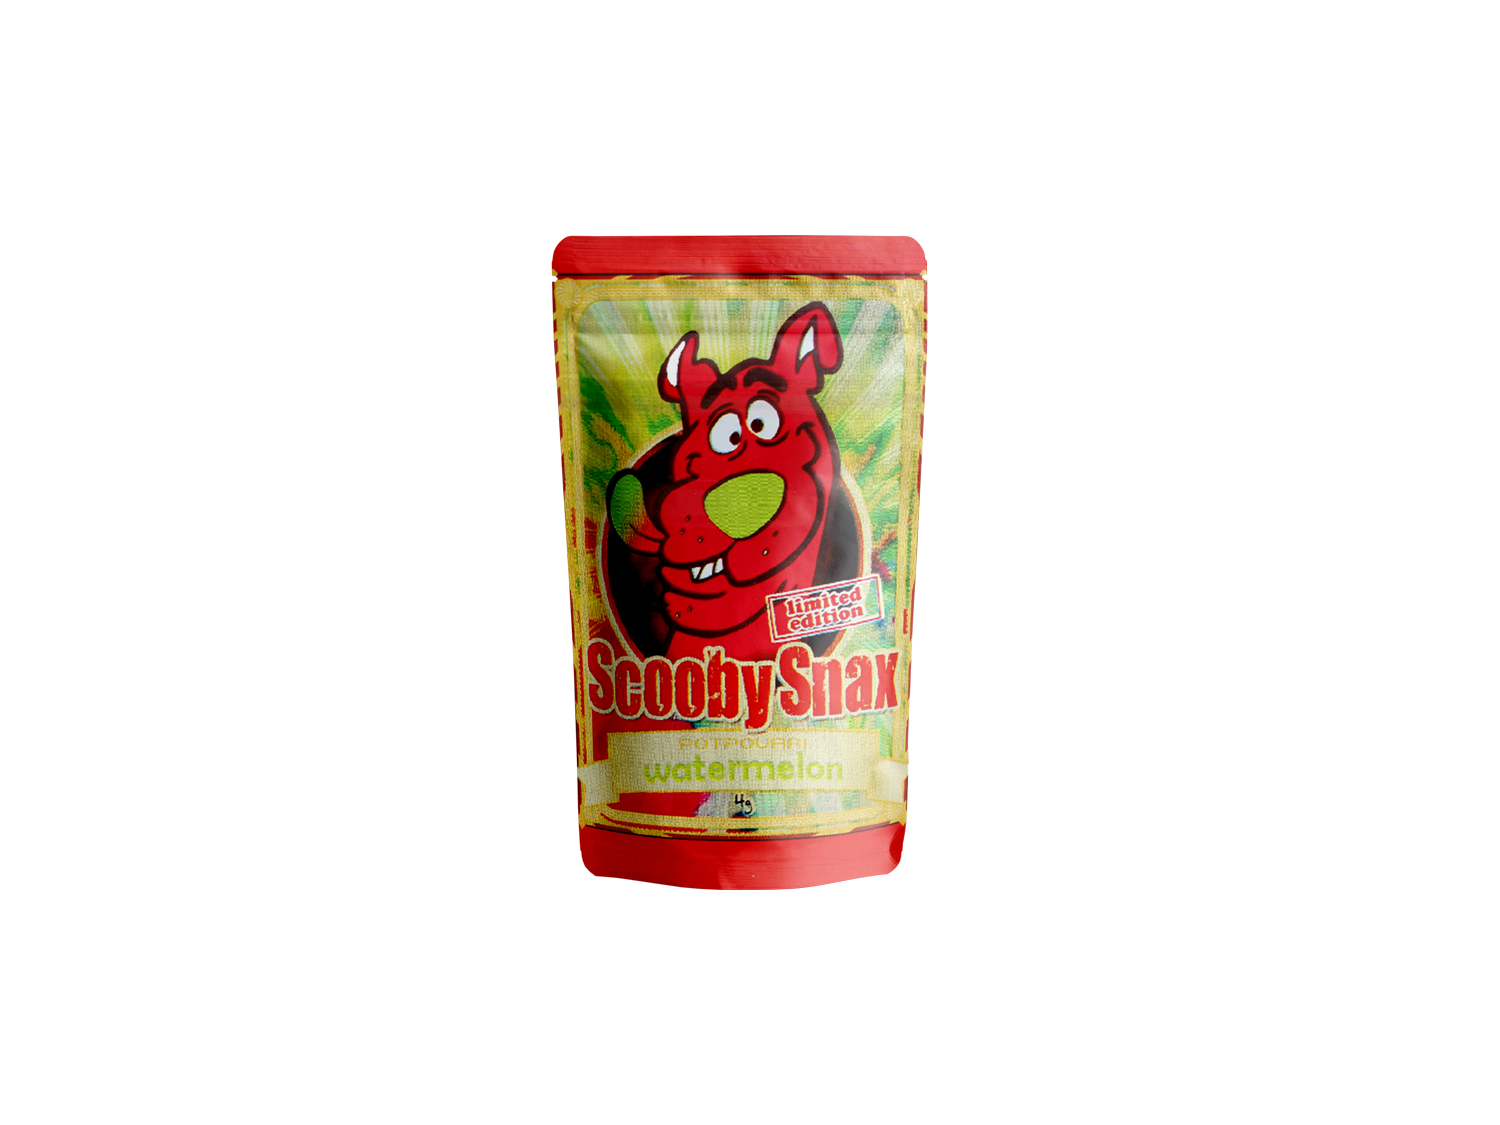 Scooby Snax Watermelon 10GRAM Bag Herbal Incense